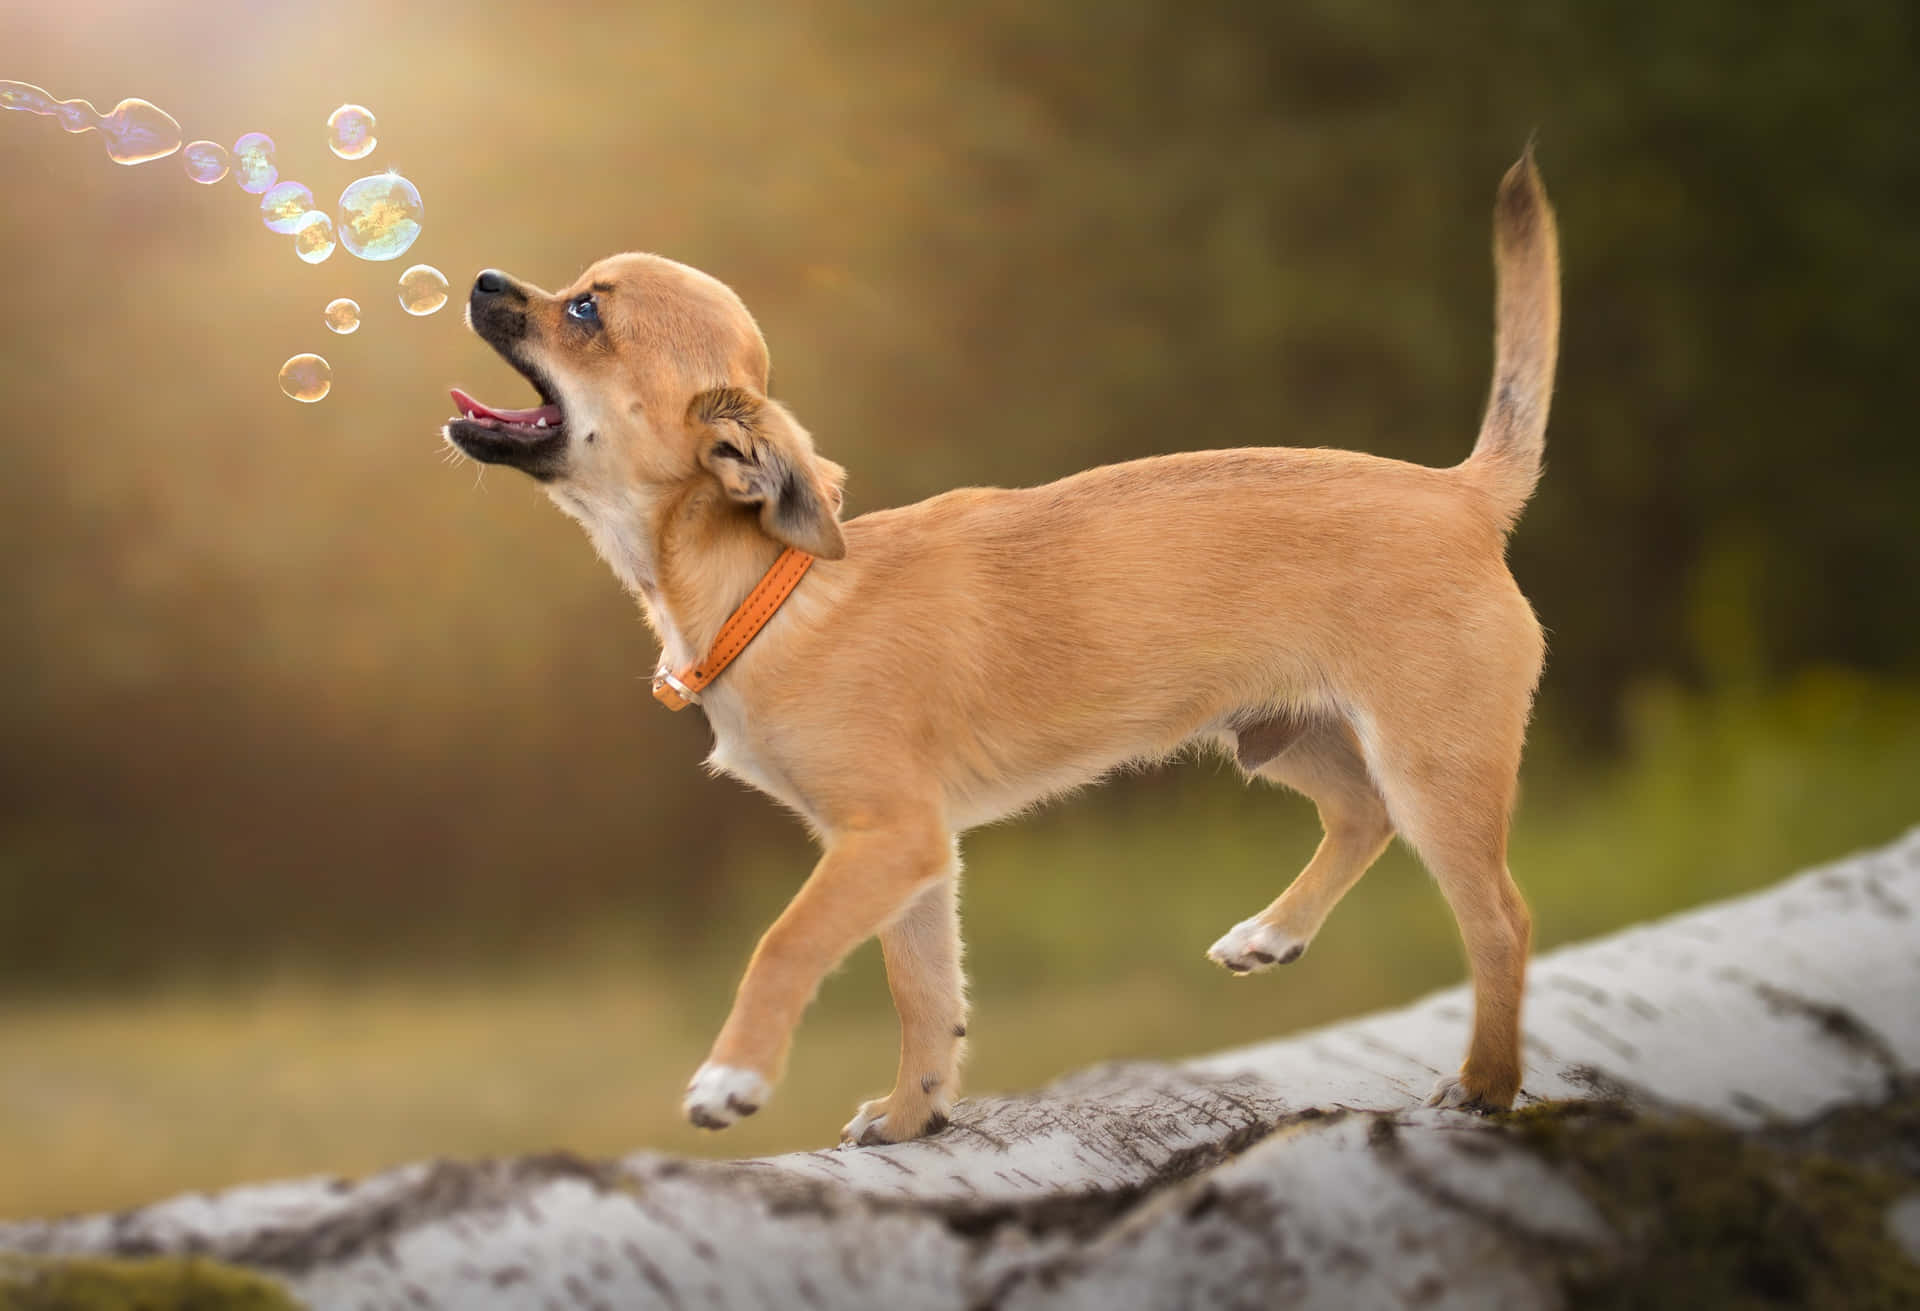 Pawn Coated Chihuahua Dog Playing With Bubbles Wallpaper